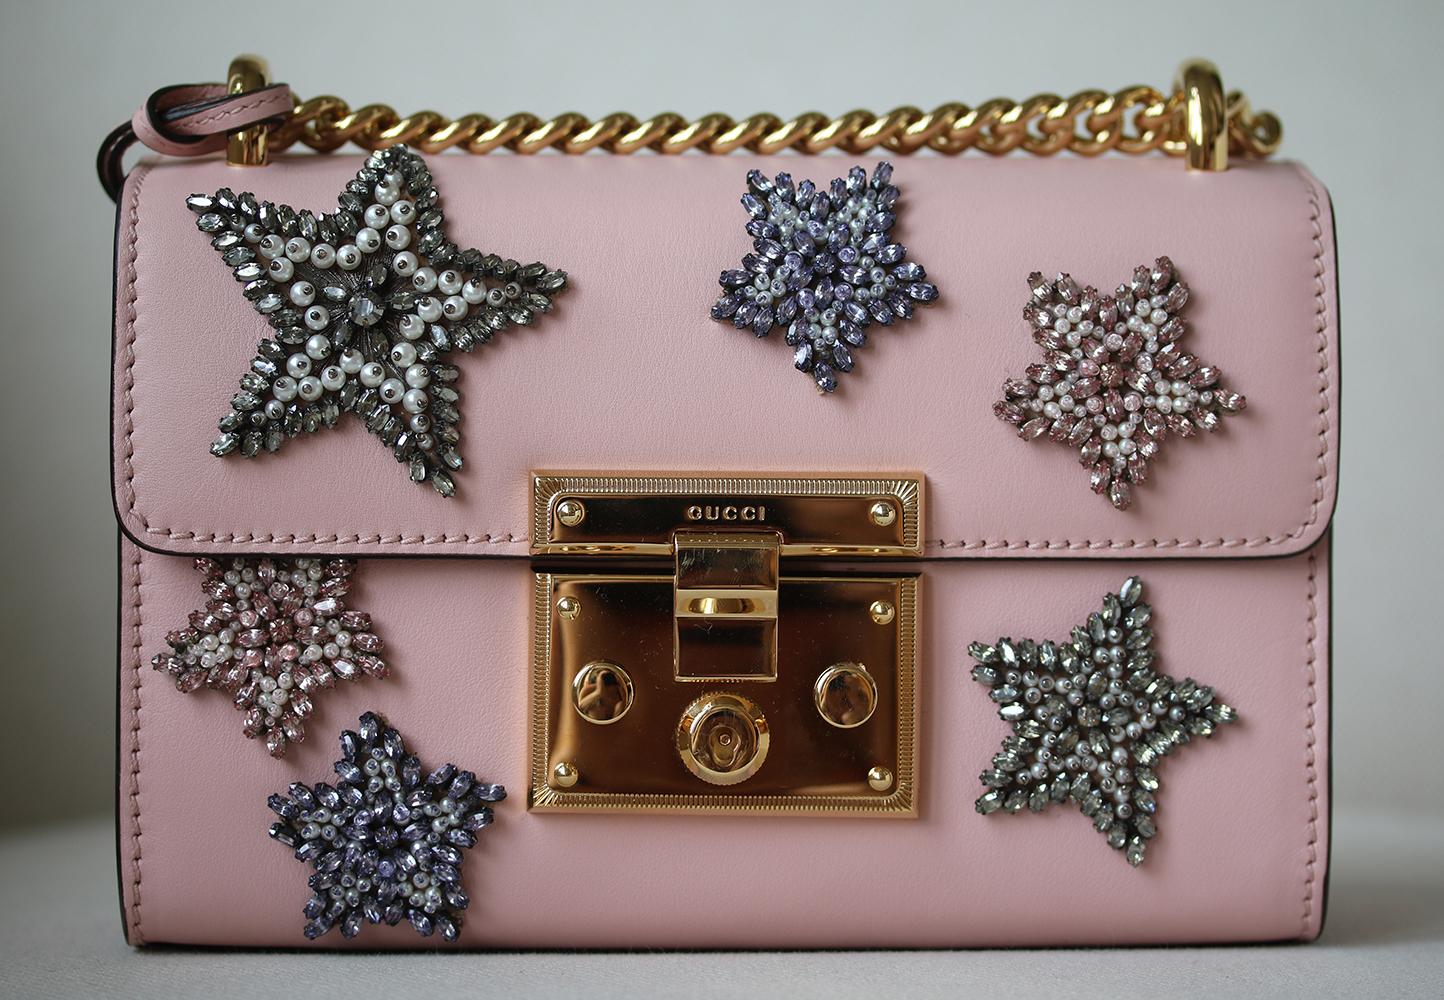 Gucci's 'Padlock' bag has been made in Italy from pink leather in a structured shape - though small, it will comfortably fit your phone, cardholder and a few cosmetics. This style is embellished with faux pearls and crystals in the shape of stars.